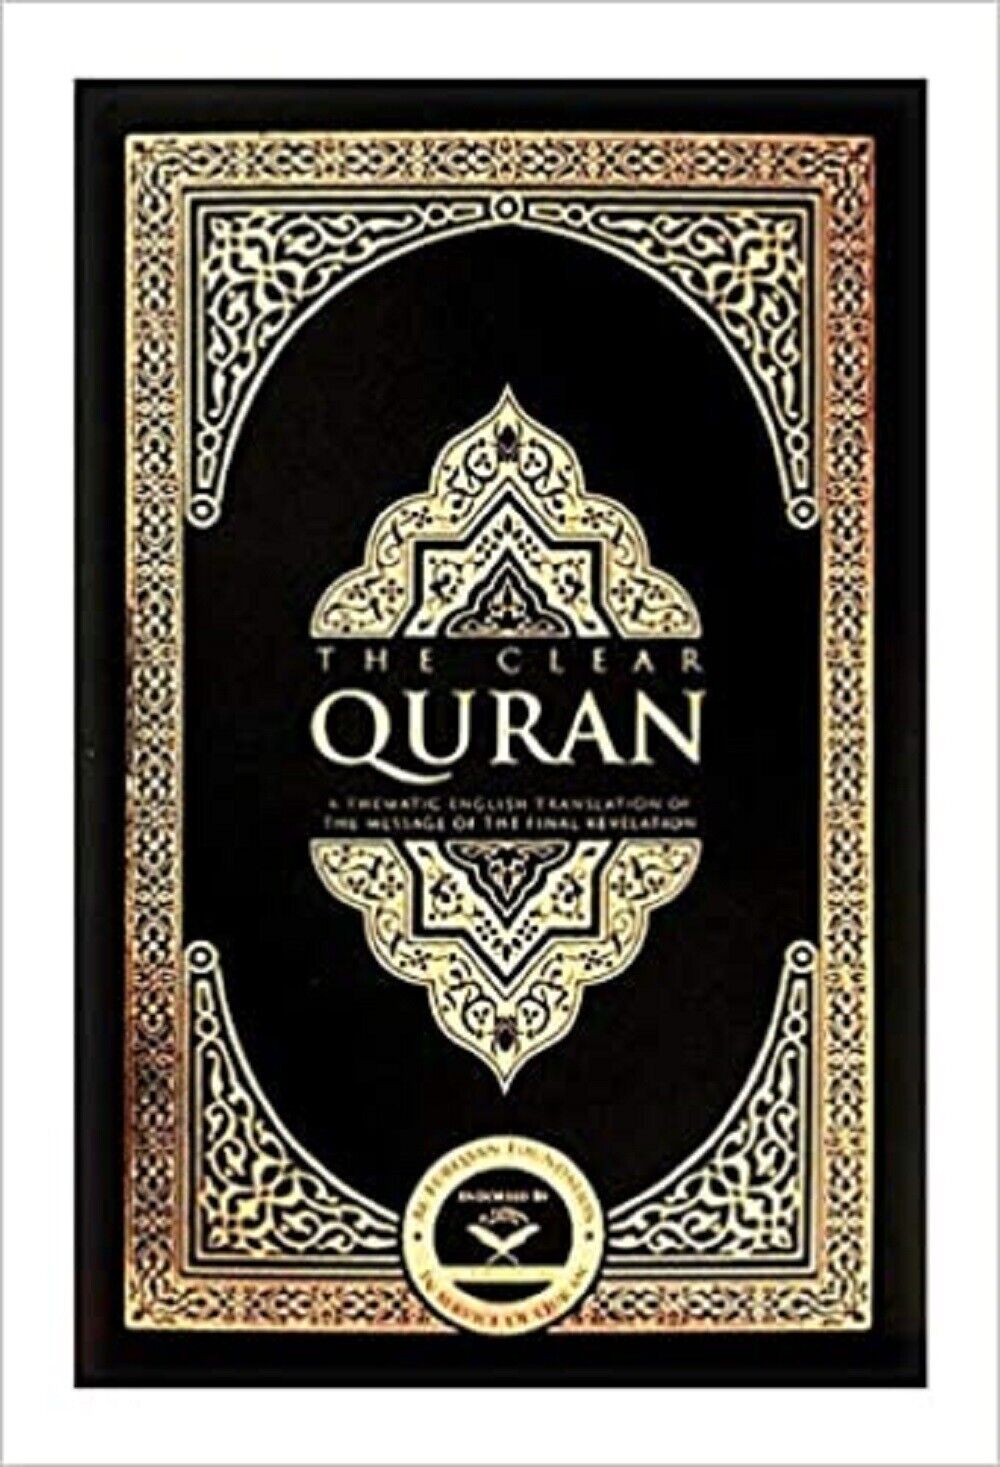 The Clear Quran, Holy Quran with English Text by Dr Mustafa Khattab-5.25